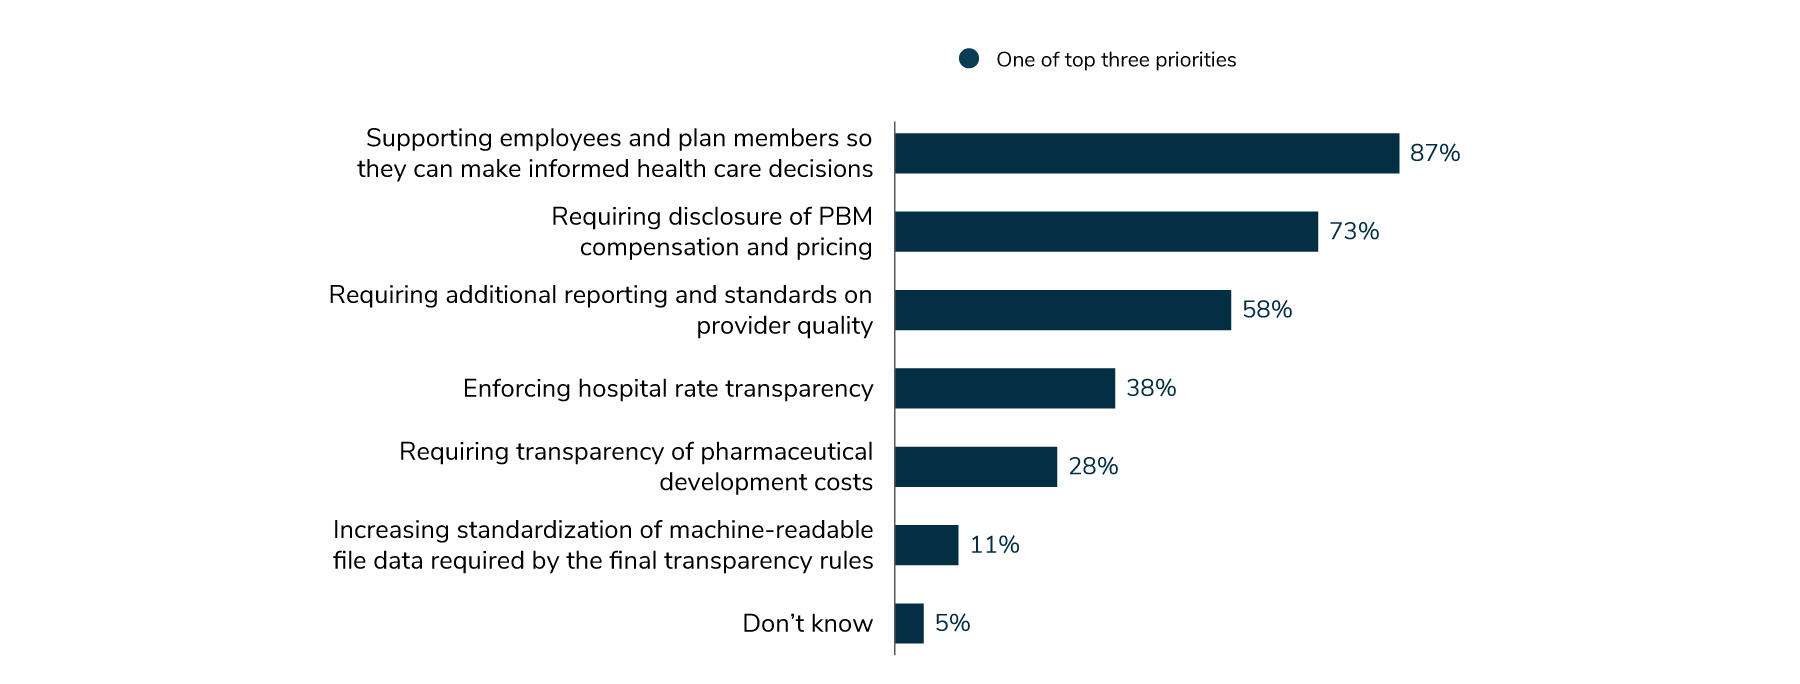 87% of employers reported that supporting employees and plan members ability to make informed health care decisions was one of their top 3 policy priorities for transparency. 73% indicated requiring disclosure of PBM compensation and pricing, followed by 58% who indicated requiring additional reporting and standards on provider quality.